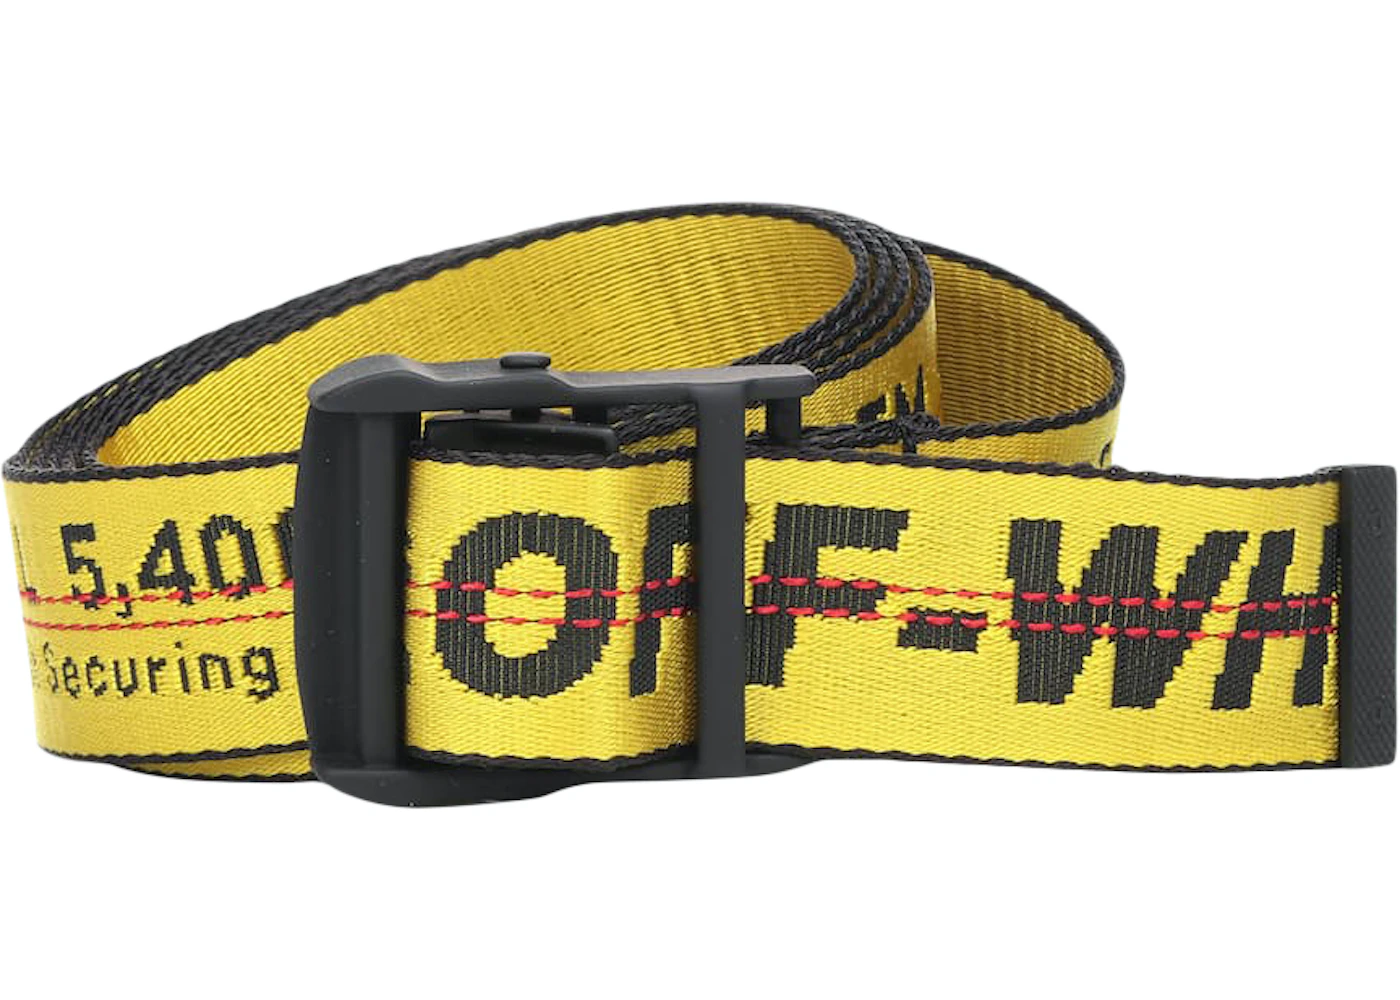 OFF-WHITE Short Industrial Belt Yellow/Black - SS20 - US